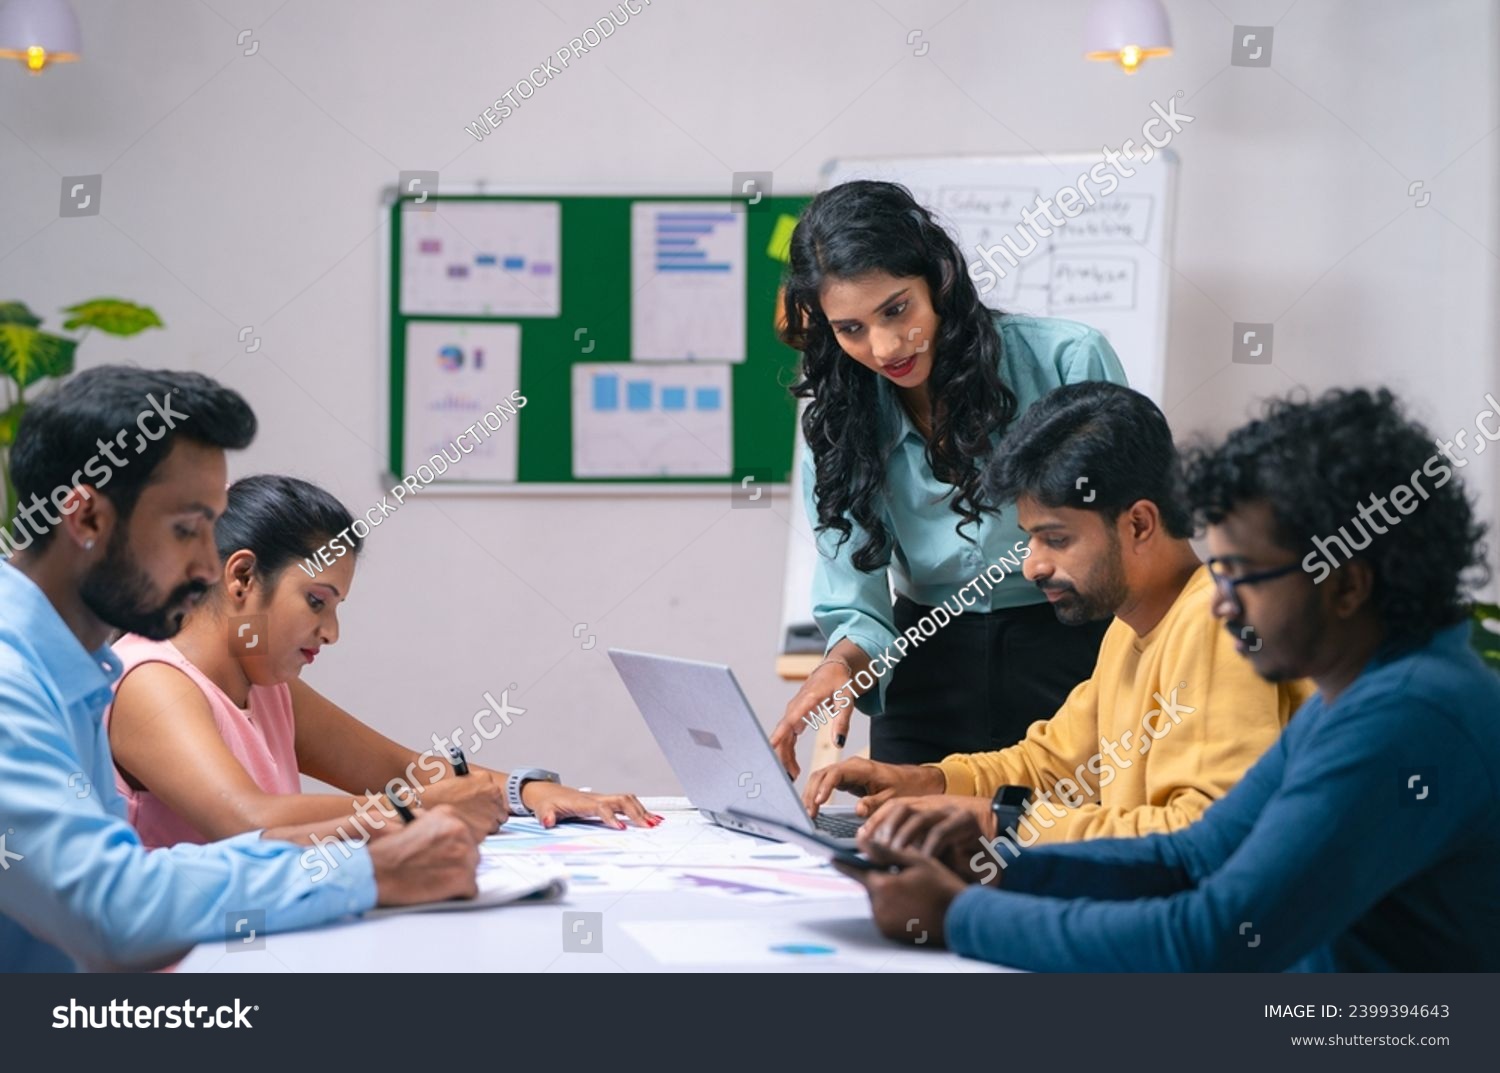 Team of co-workers busy working at office during discussion or business training - concept of communication, startup coordination and woman leadership. #2399394643